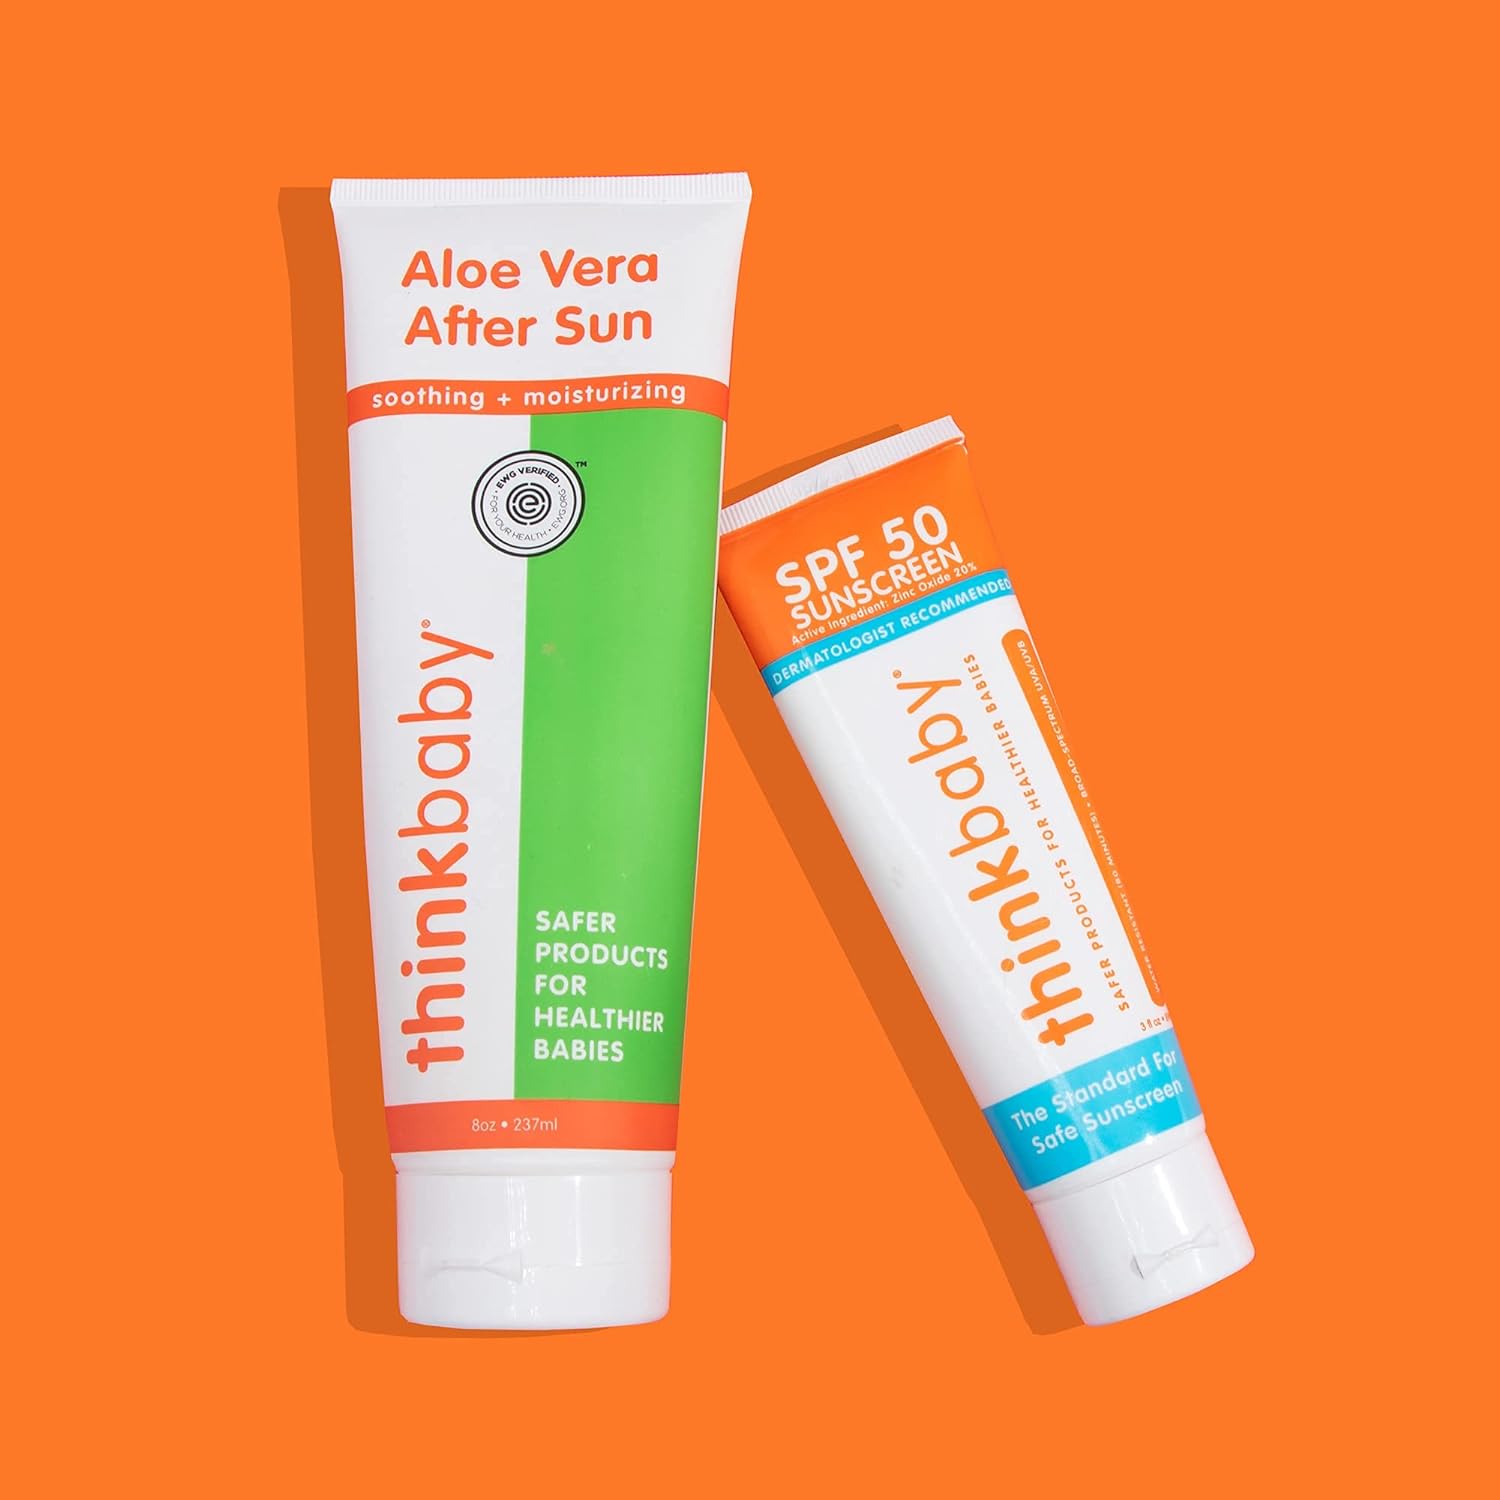 Buy Thinkbaby Sunscreen & After Sun Bundle – 1x SPF 50+ Water Resistant Baby Sunscreen with Broad Spectrum UVA/UVB Protection (6oz) and 1x Aloe Vera After Sun Relief Gel (8oz) on Amazon.com ? FREE SHIPPING on qualified orders